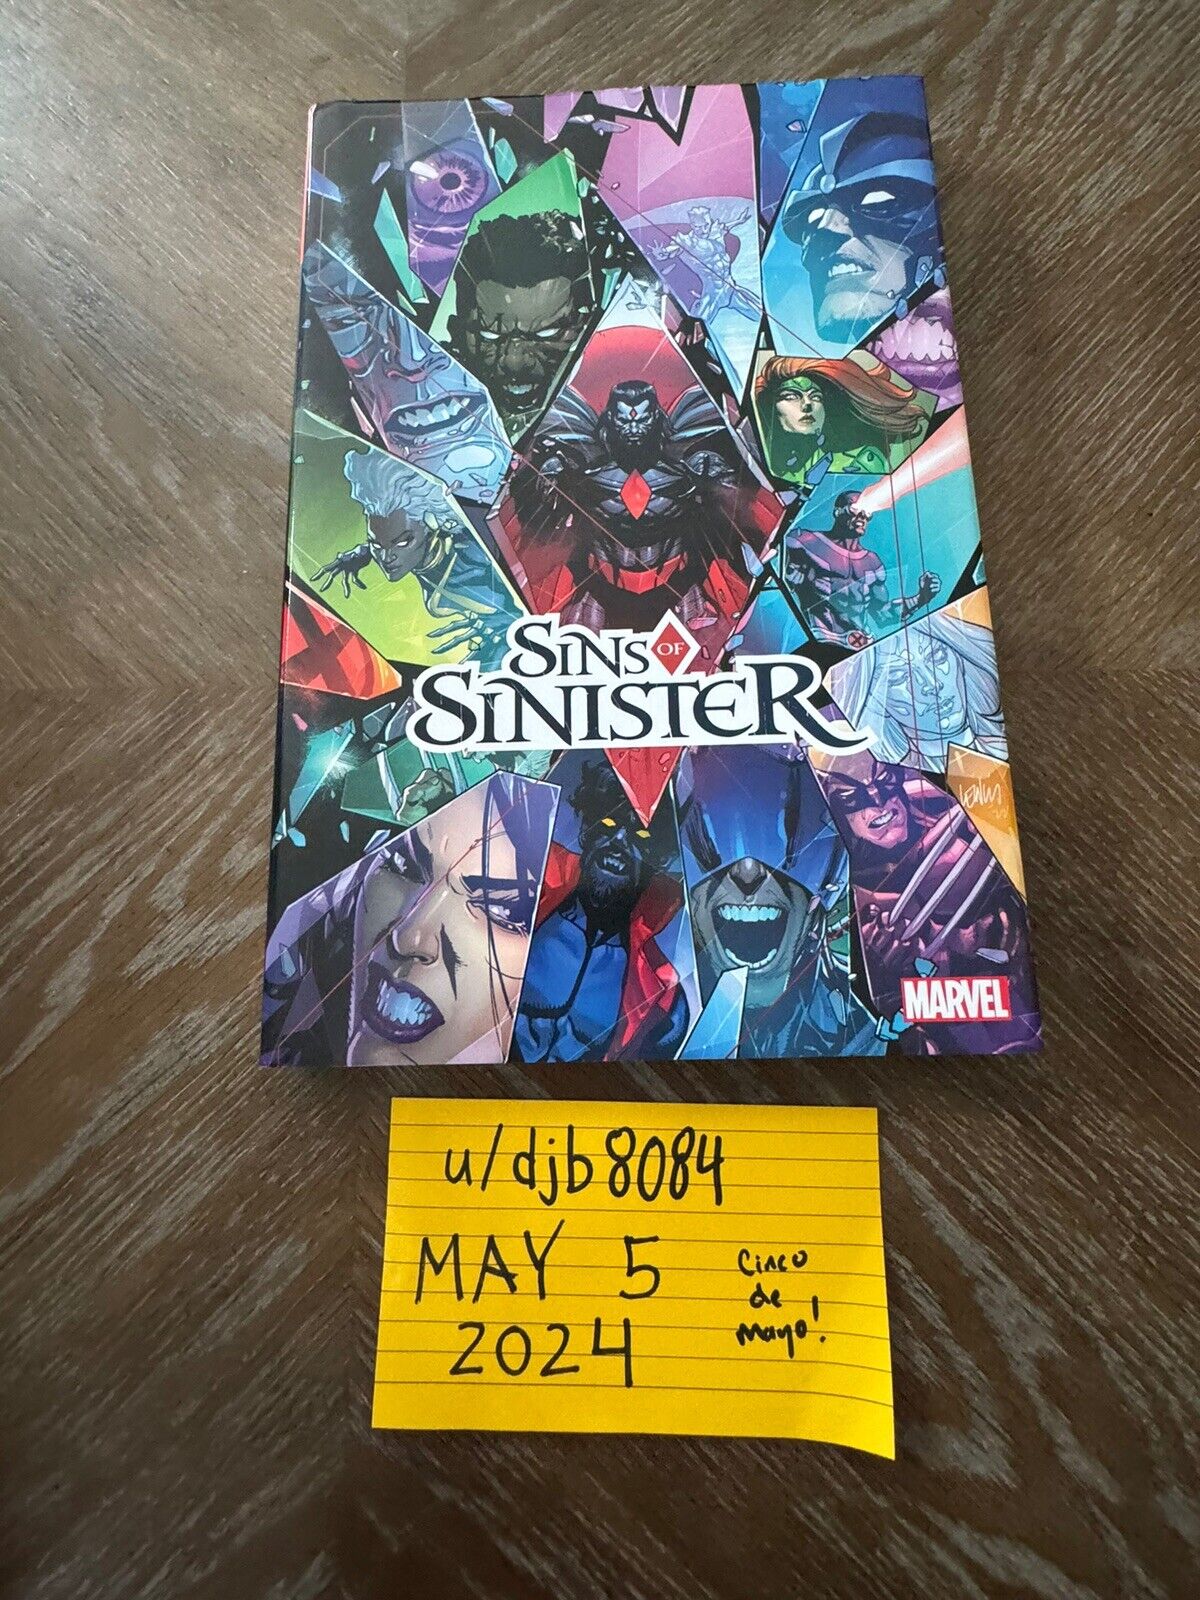 Sins of Sinister Hardcover vol 1